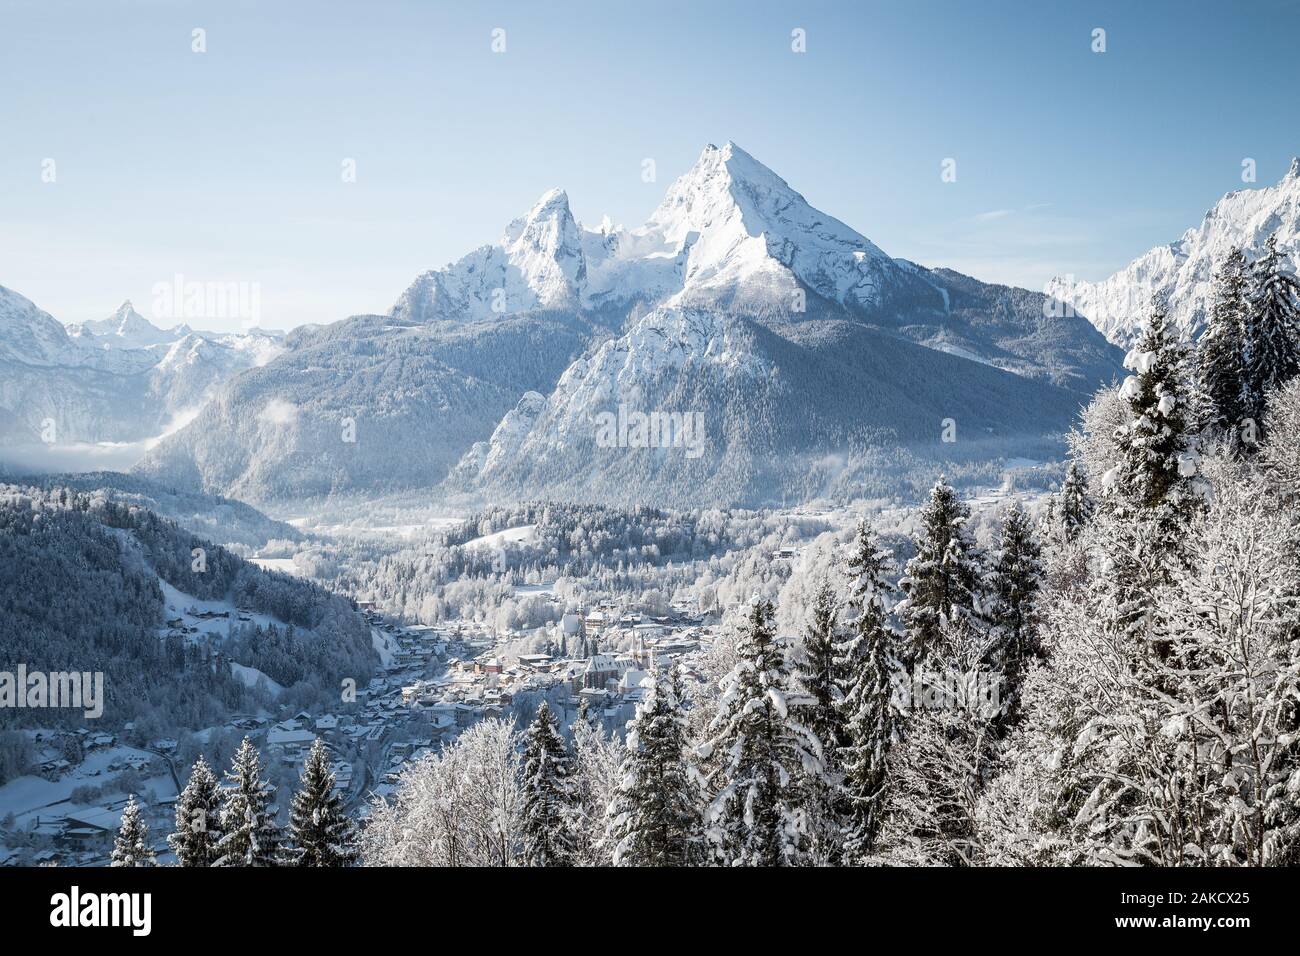 Beautiful mountain landscape in the Bavarian Alps with village of Berchtesgaden and Watzmann massif in the background at sunrise, Nationalpark Berchte Stock Photo